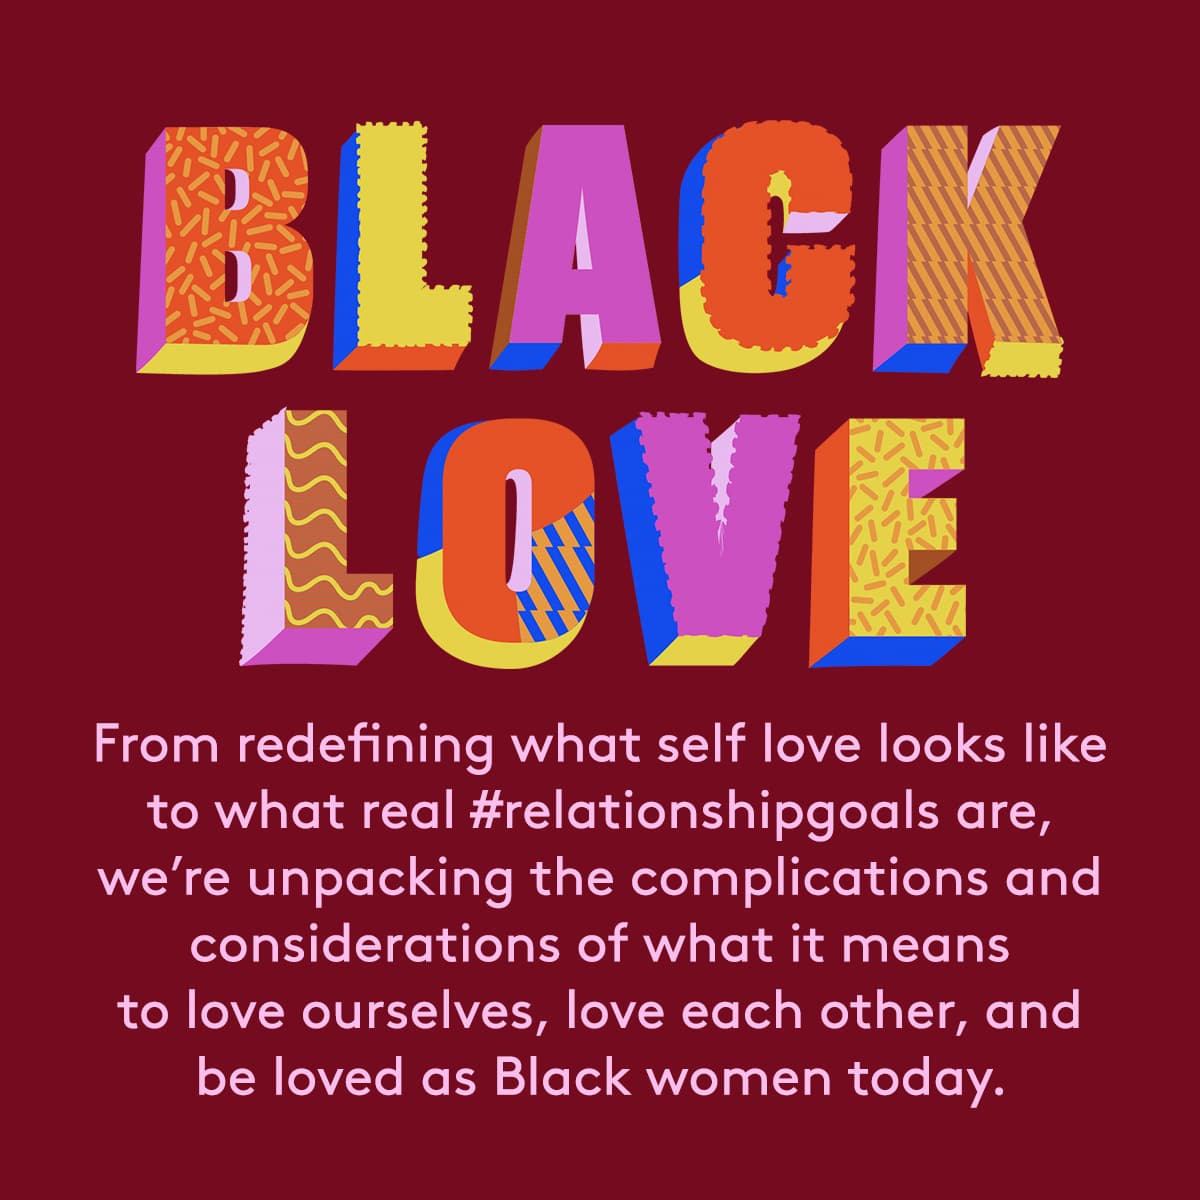 Black love. From redefining what self love looks like to what real #relationshipgoals are, 
we’re unpacking the complications and considerations of what it means to love ourselves, love each other, and be loved as Black women today.